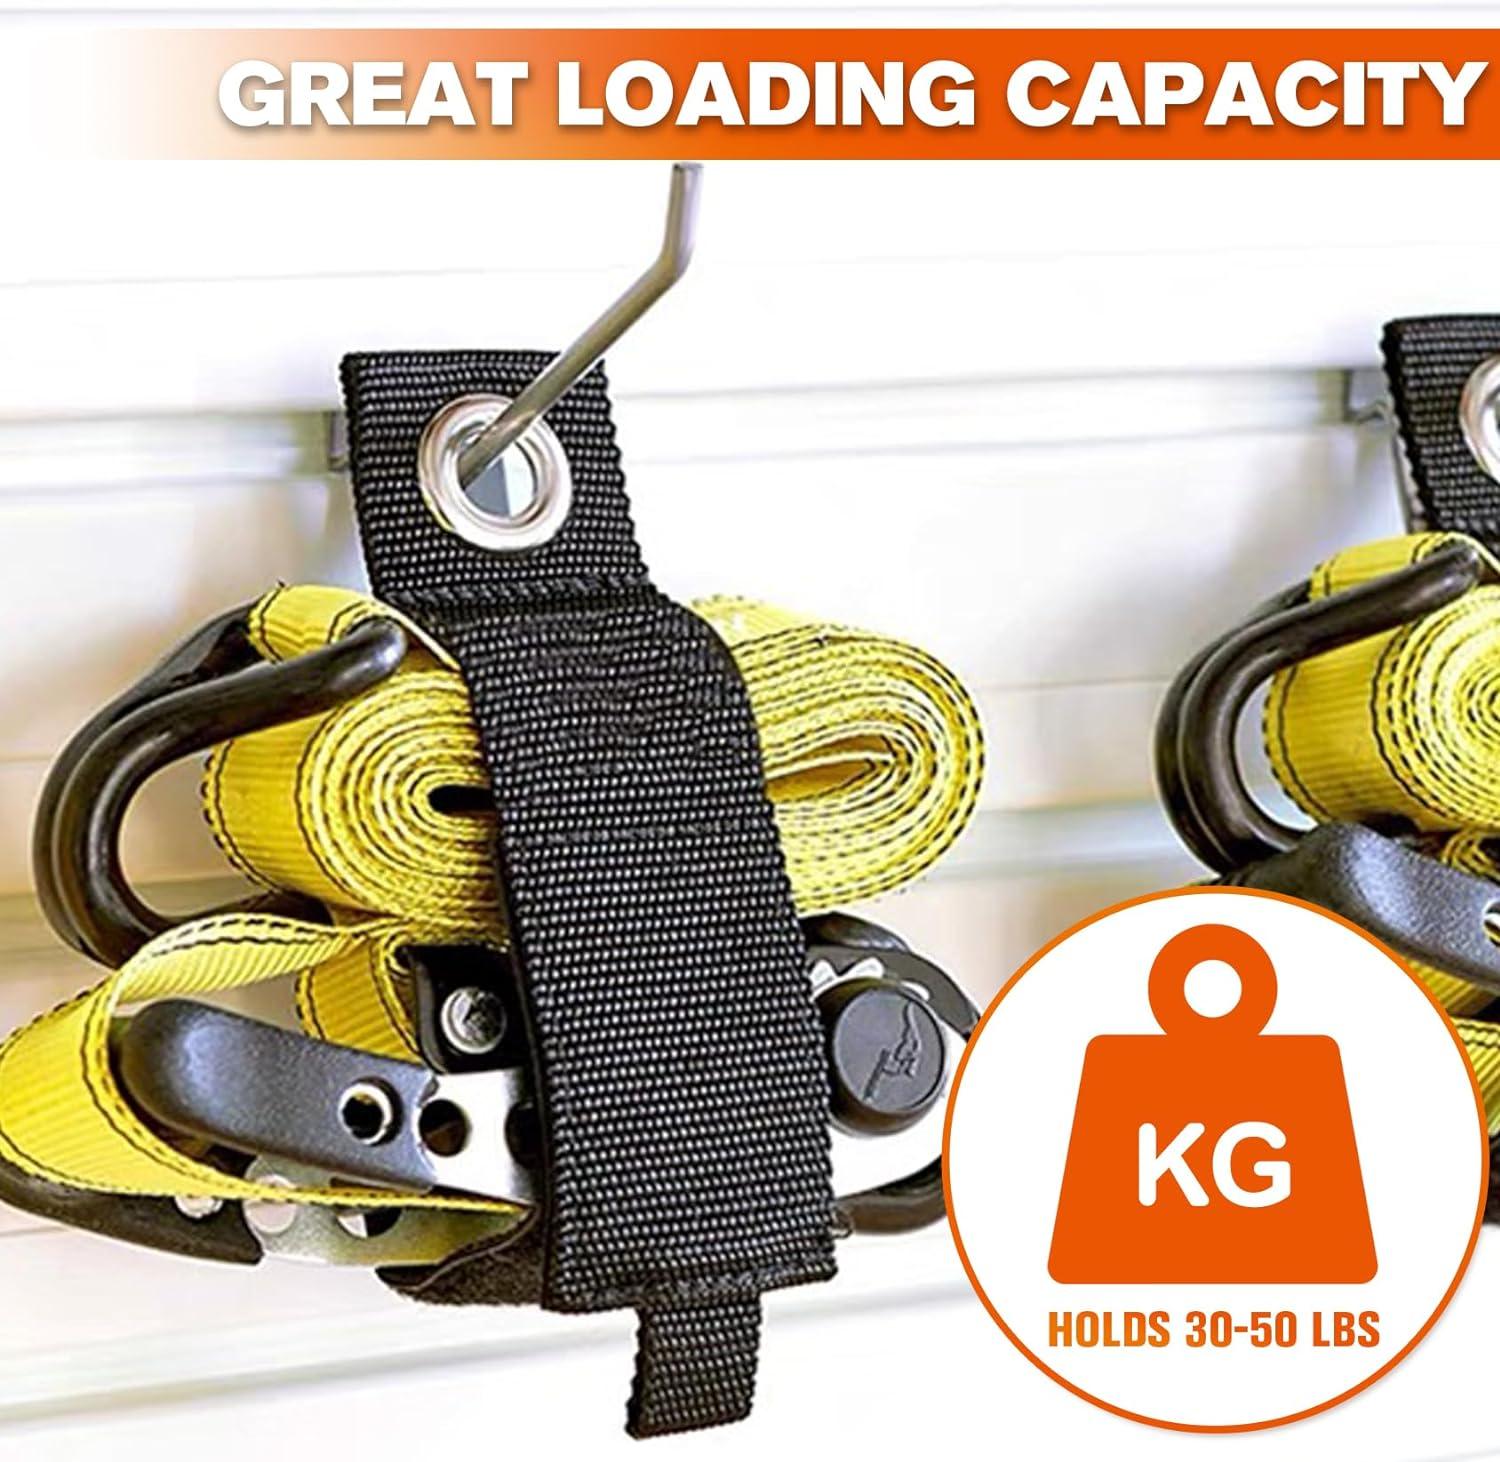 Kanemc 4PCS Magnetic Cable Storage Straps Heavy Duty, Extension Cord Holder  Magnet Hooks for Hanging Cables Hoses Workshop Rope Garden Garage  Organization 